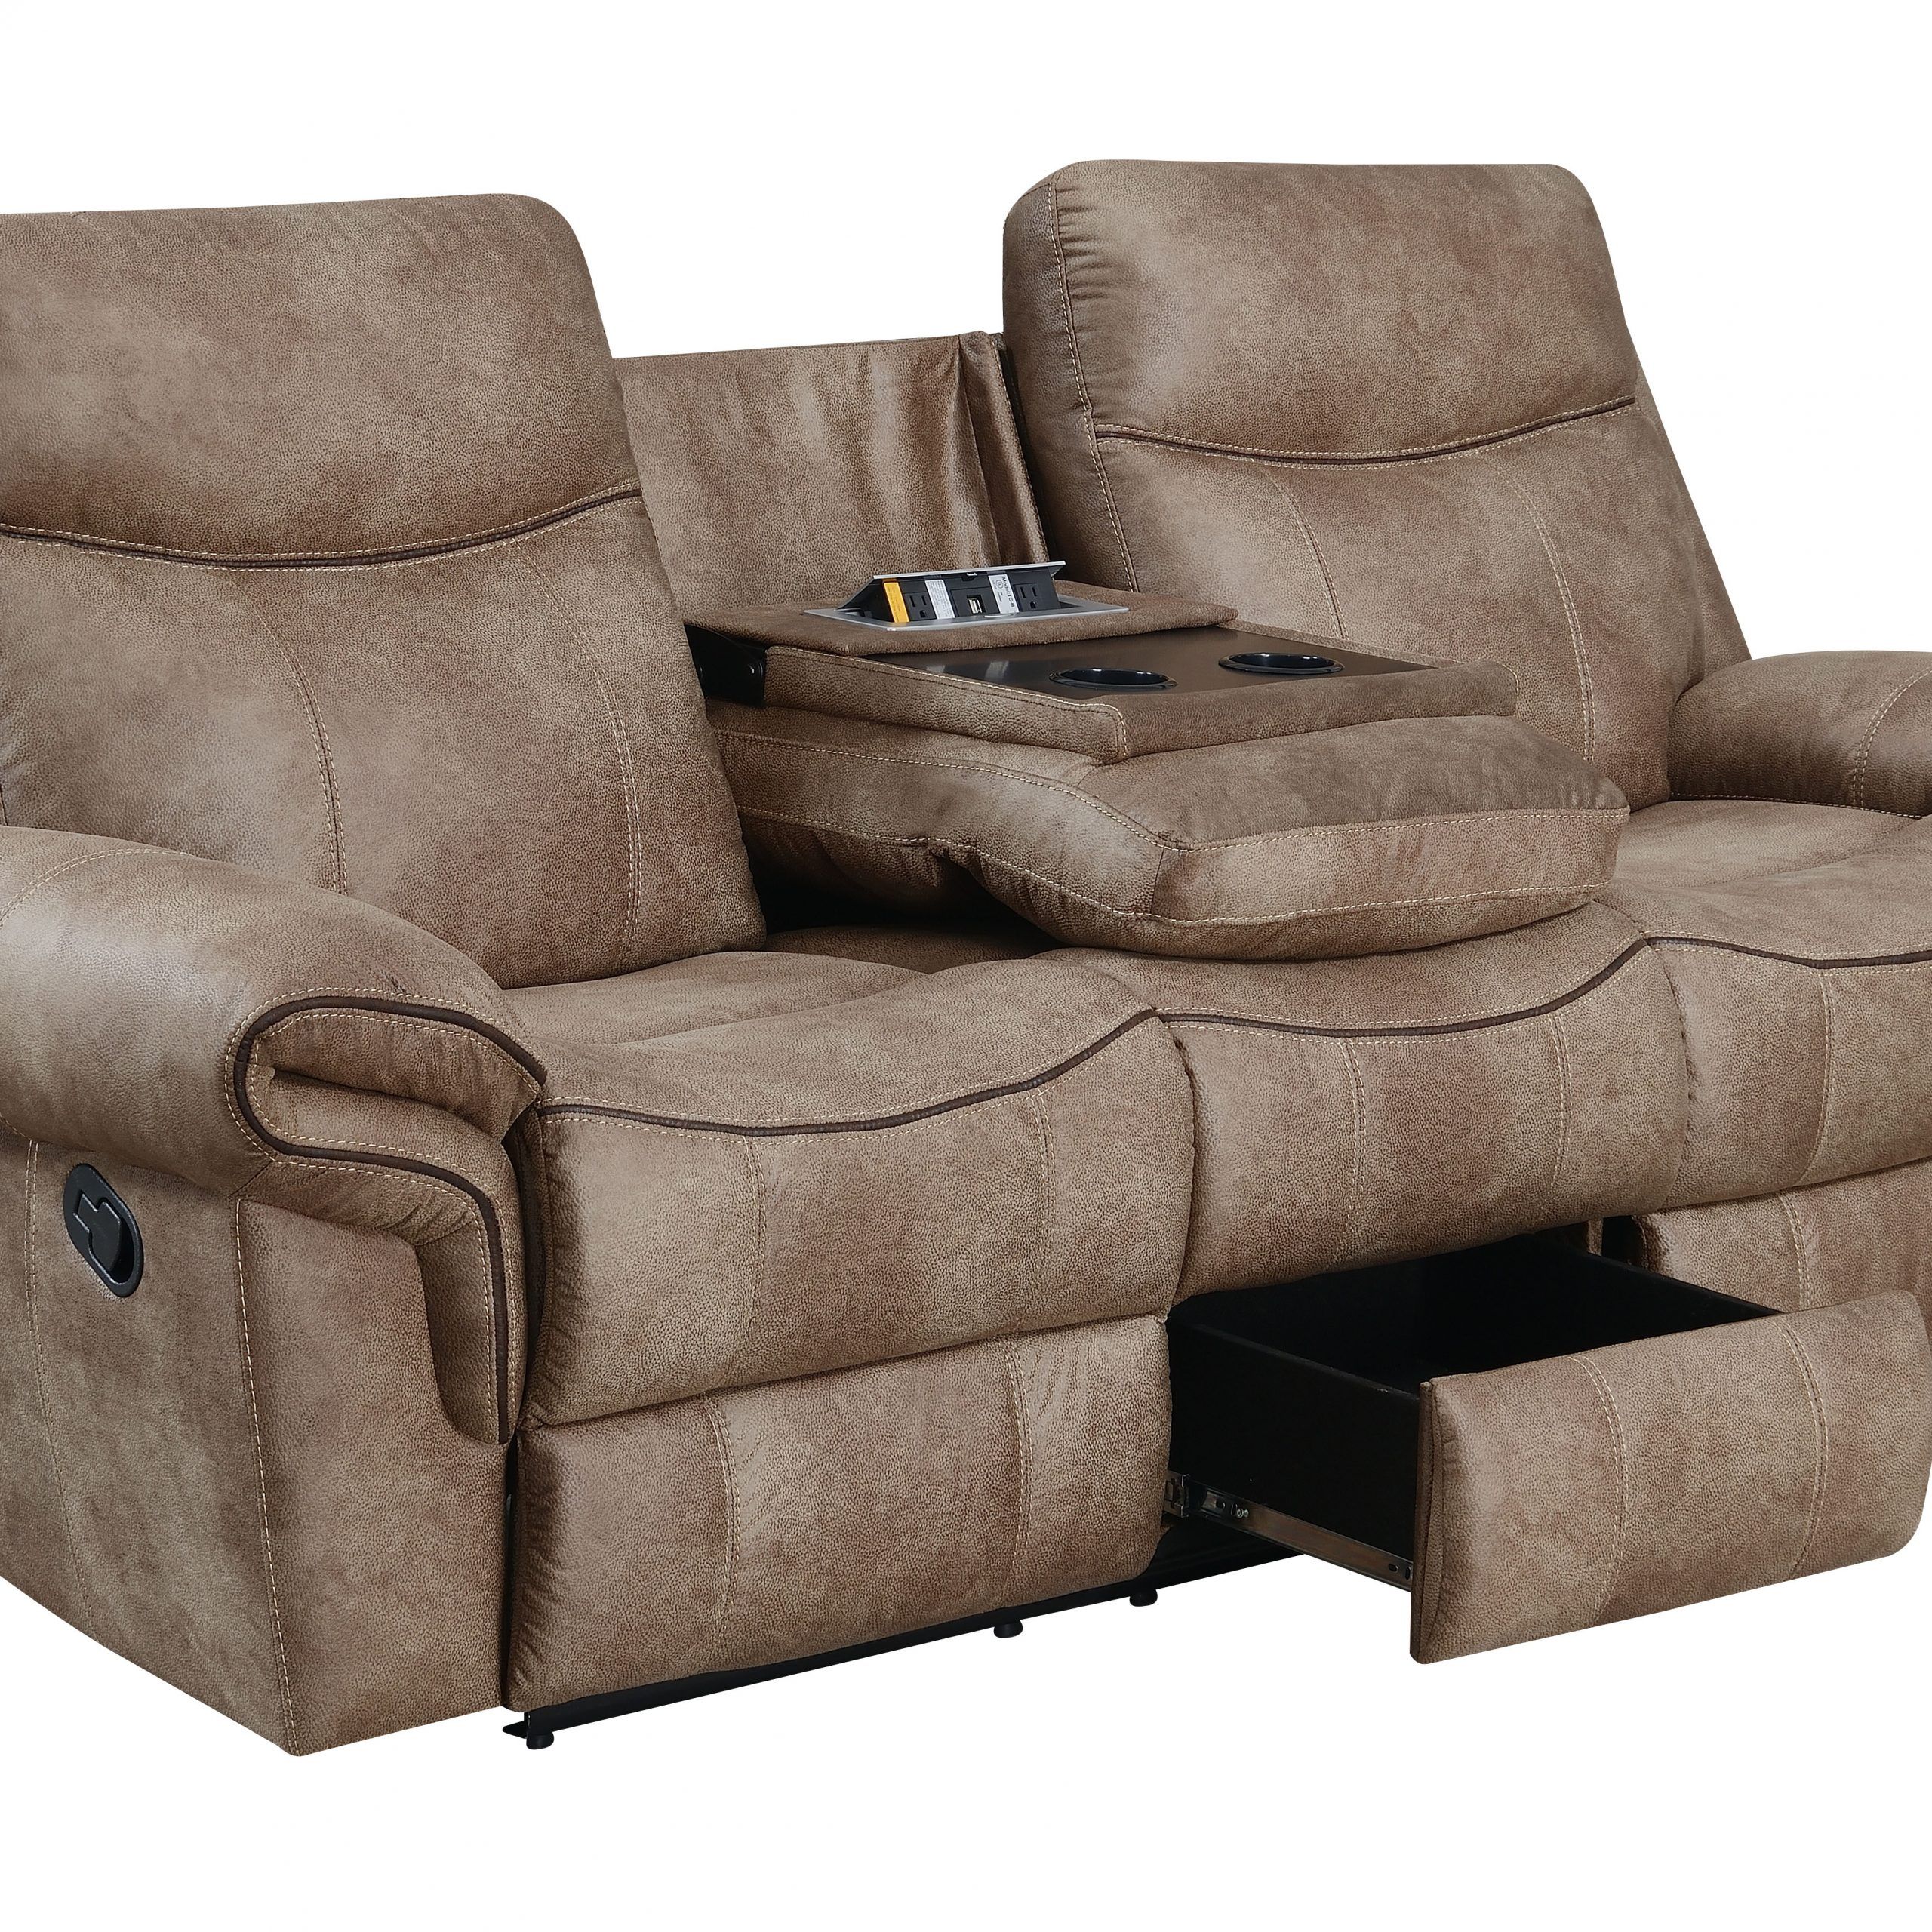 Steve Silver Nh850s Nashville Cocoa Reclining Sofa With Within Cocoa Console Tables (View 16 of 20)